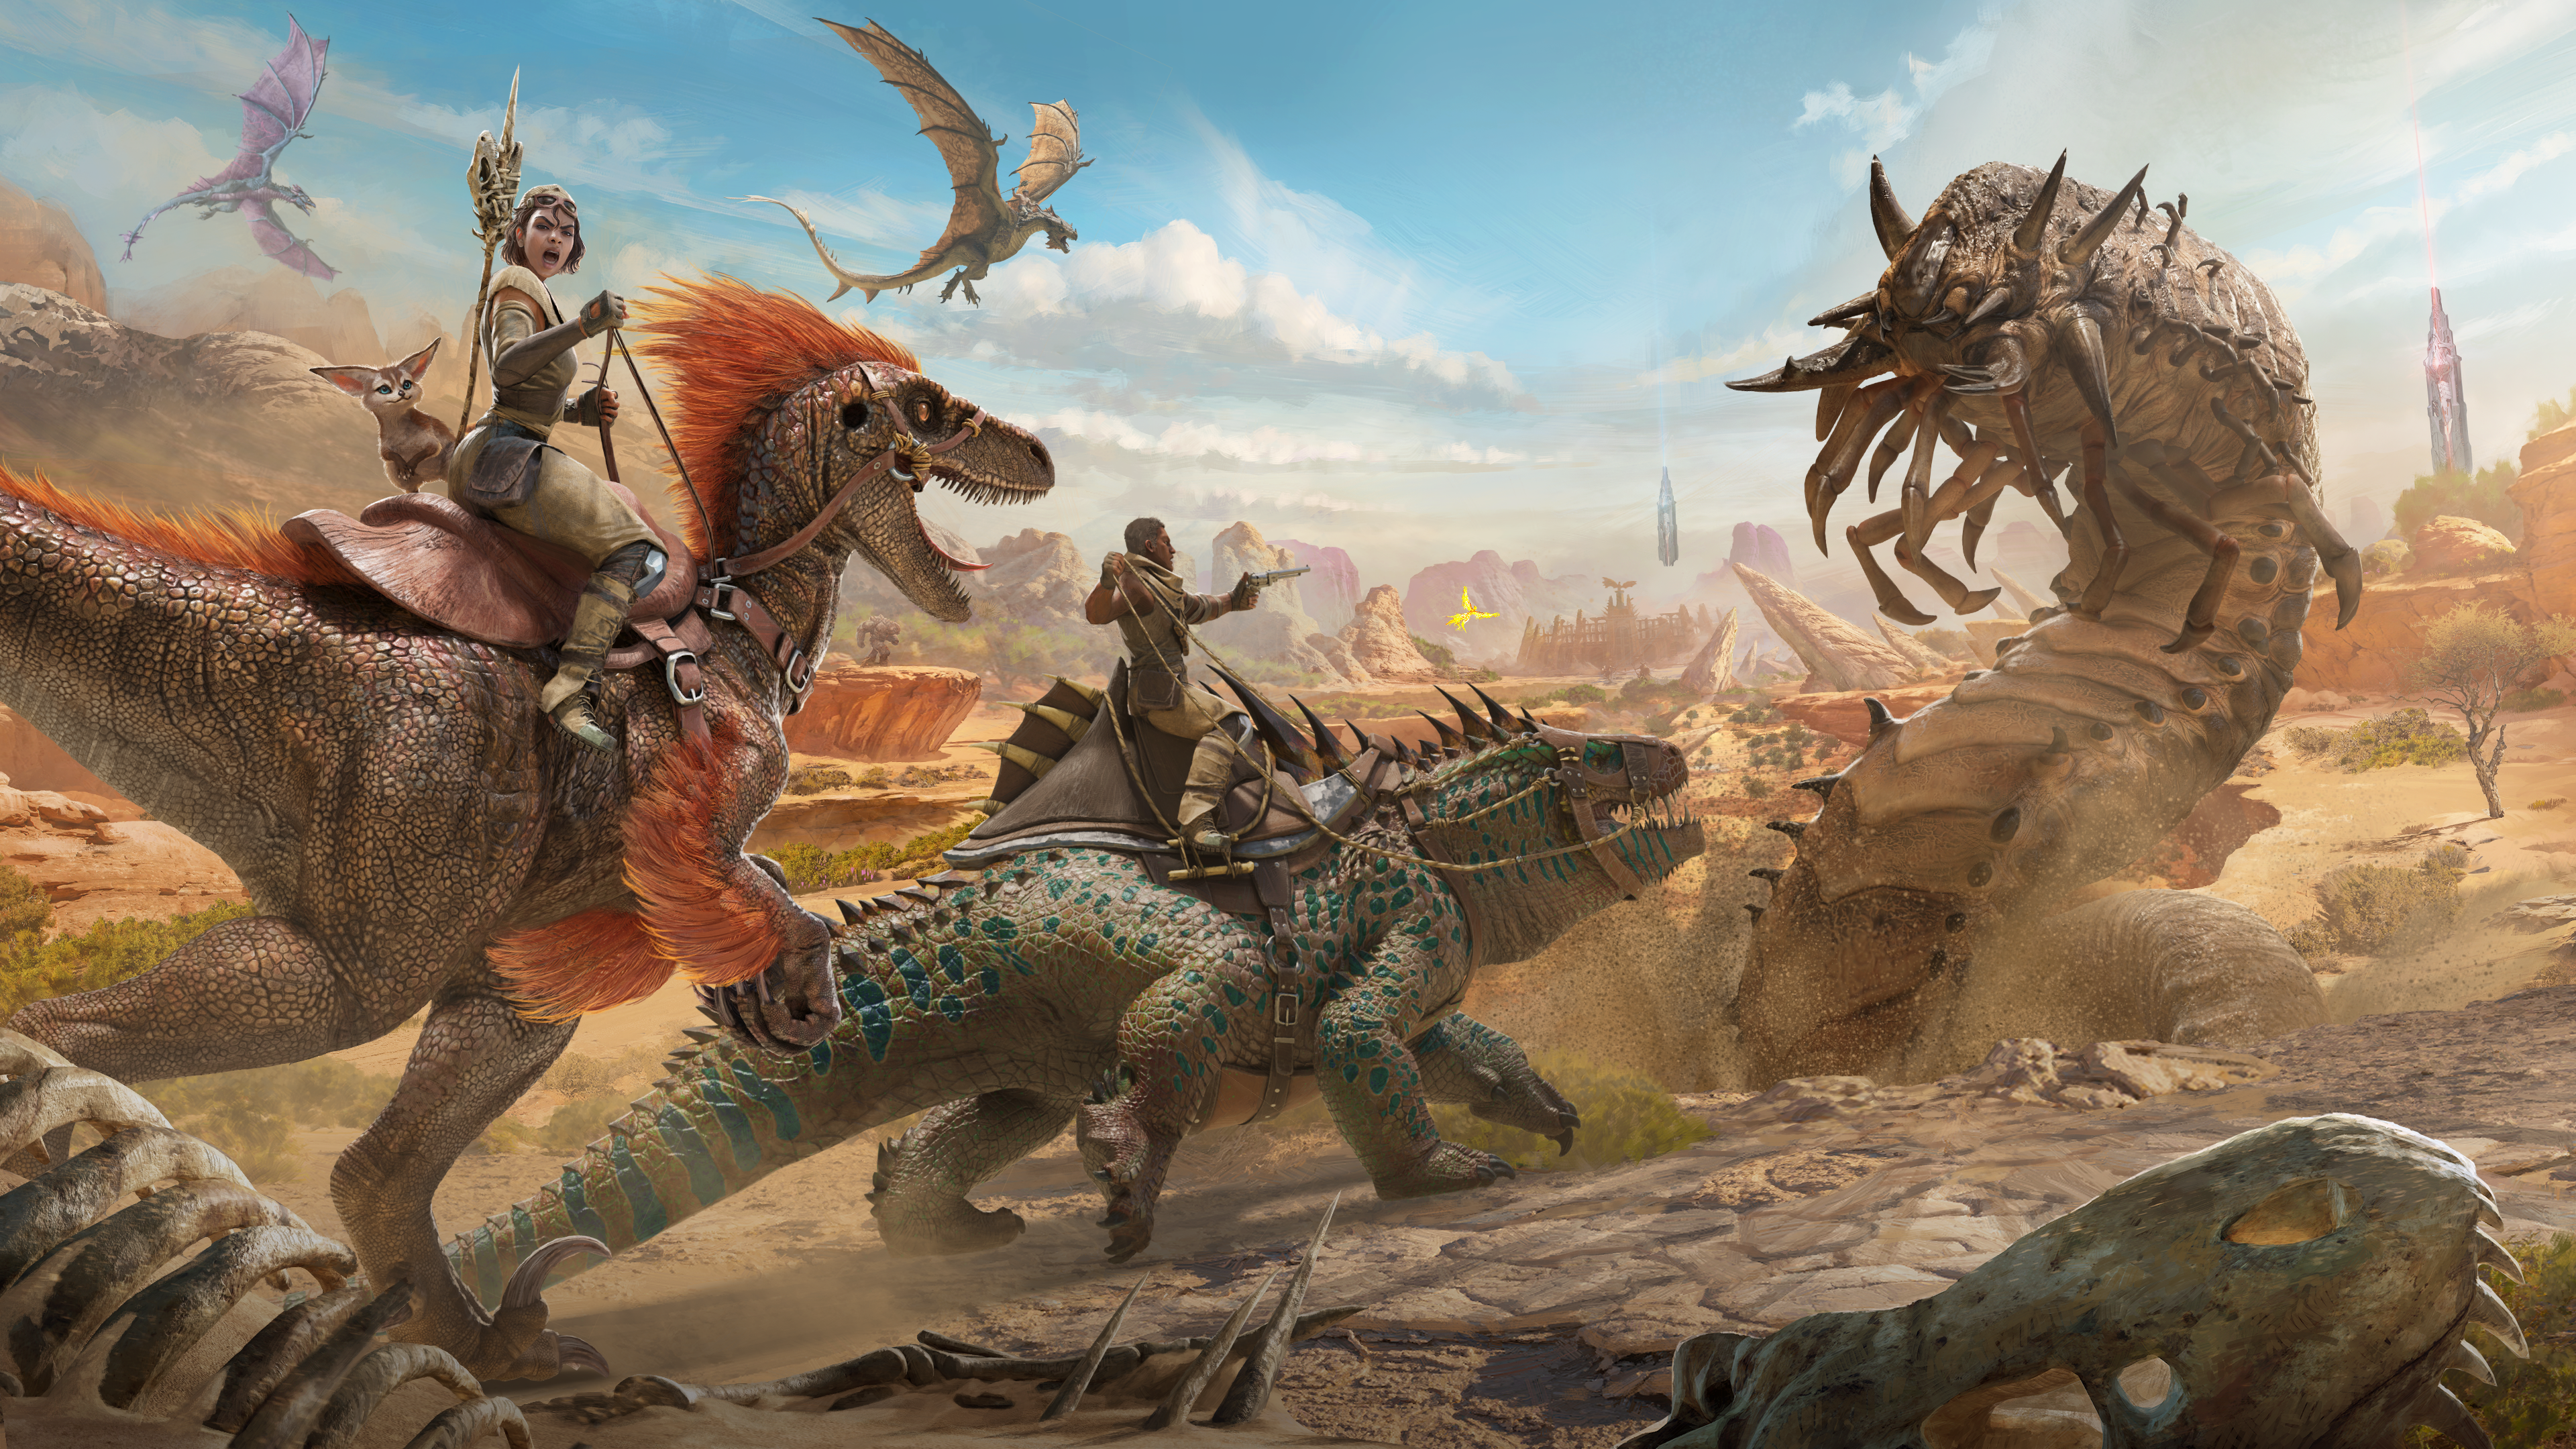 Ark: Survival Ascended is free this weekend alongside Scorched Earth expansion